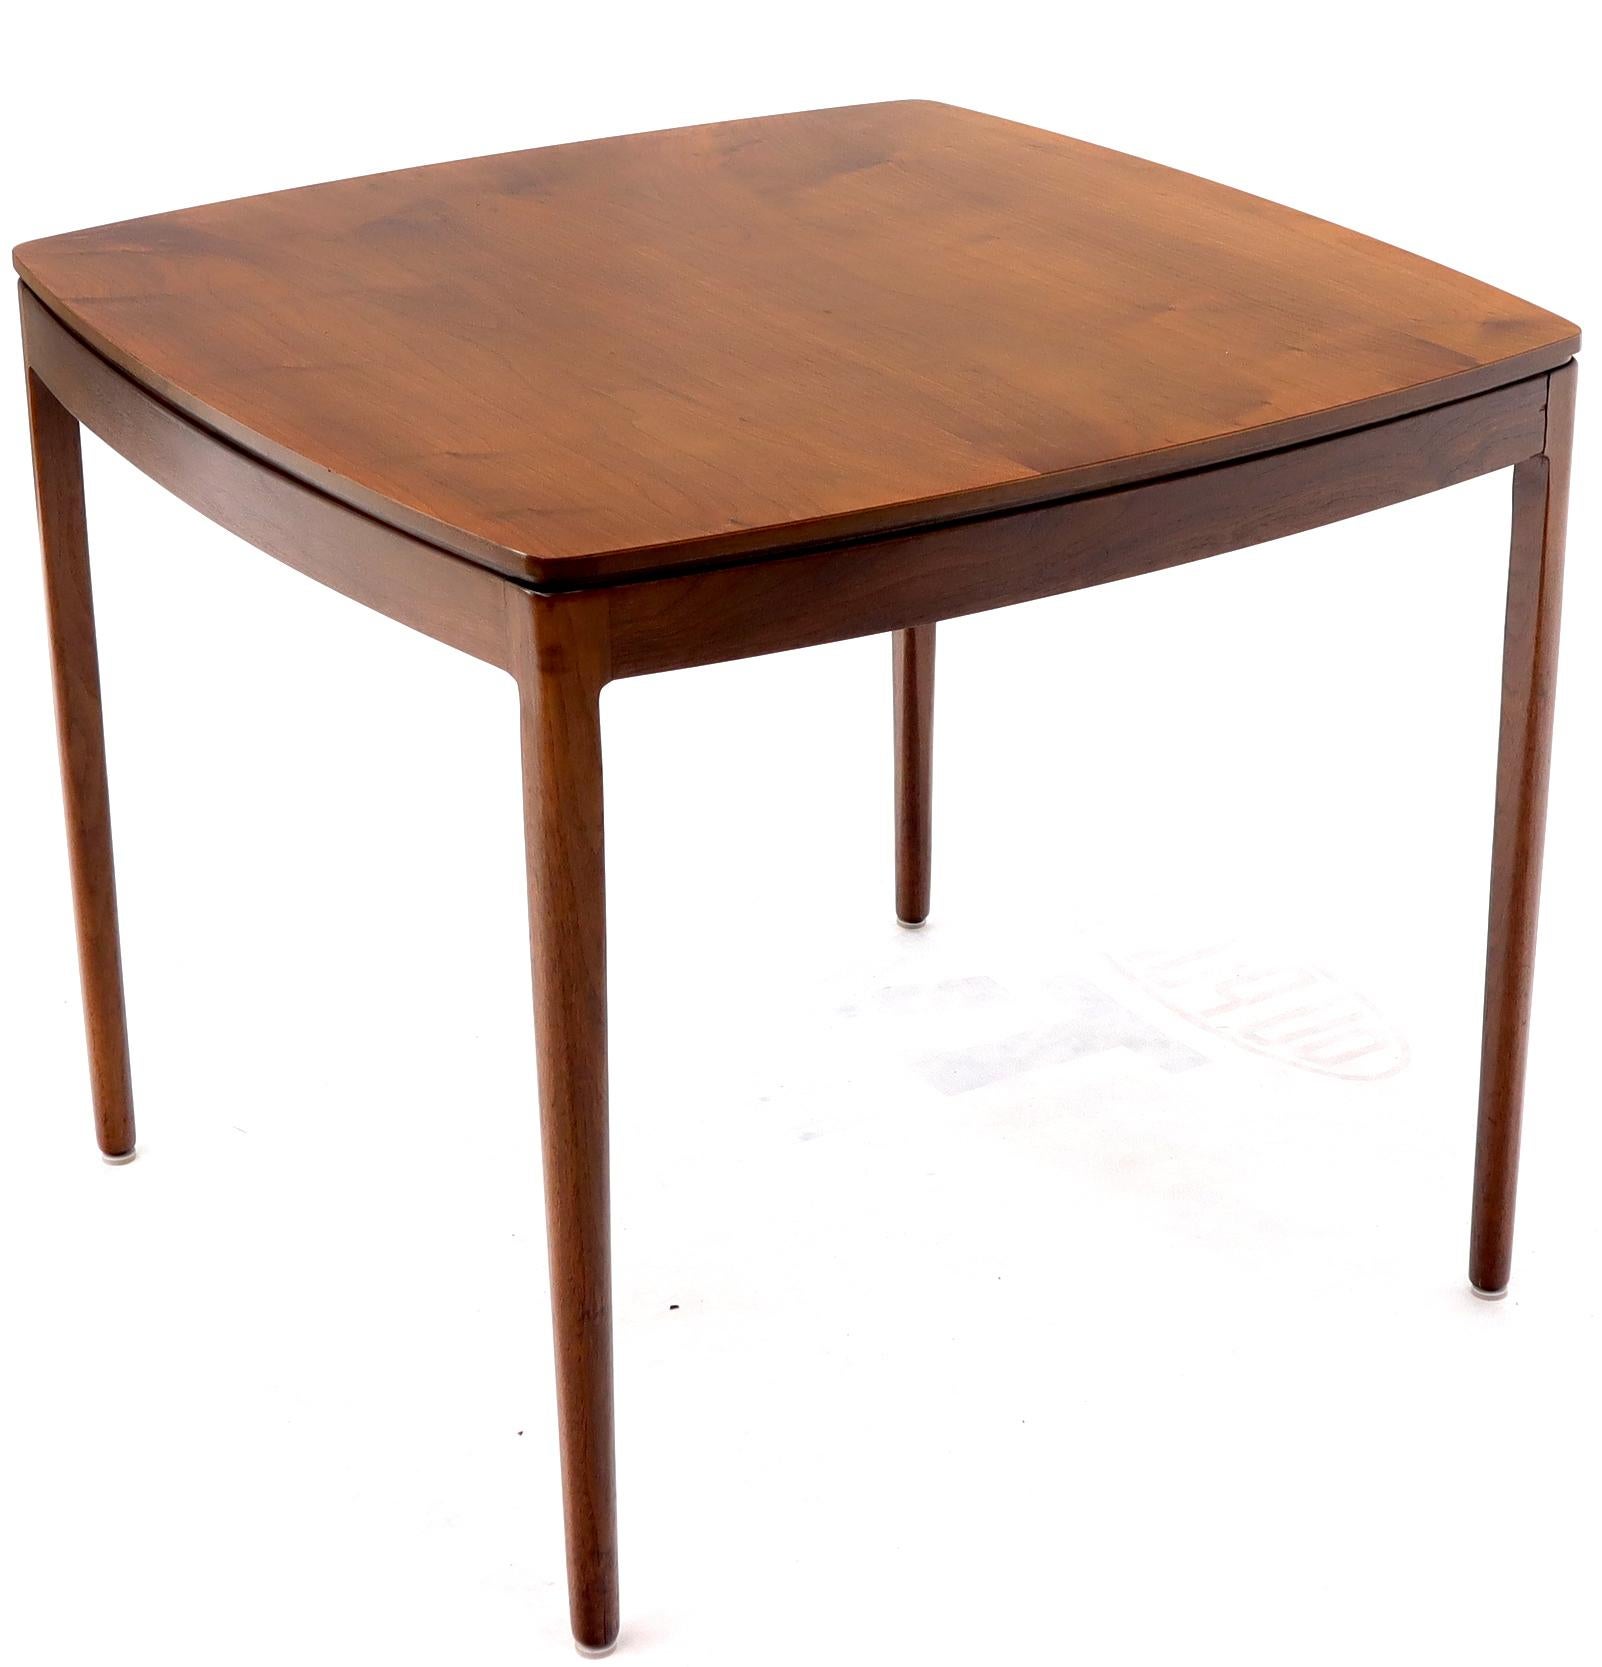 rounded square table